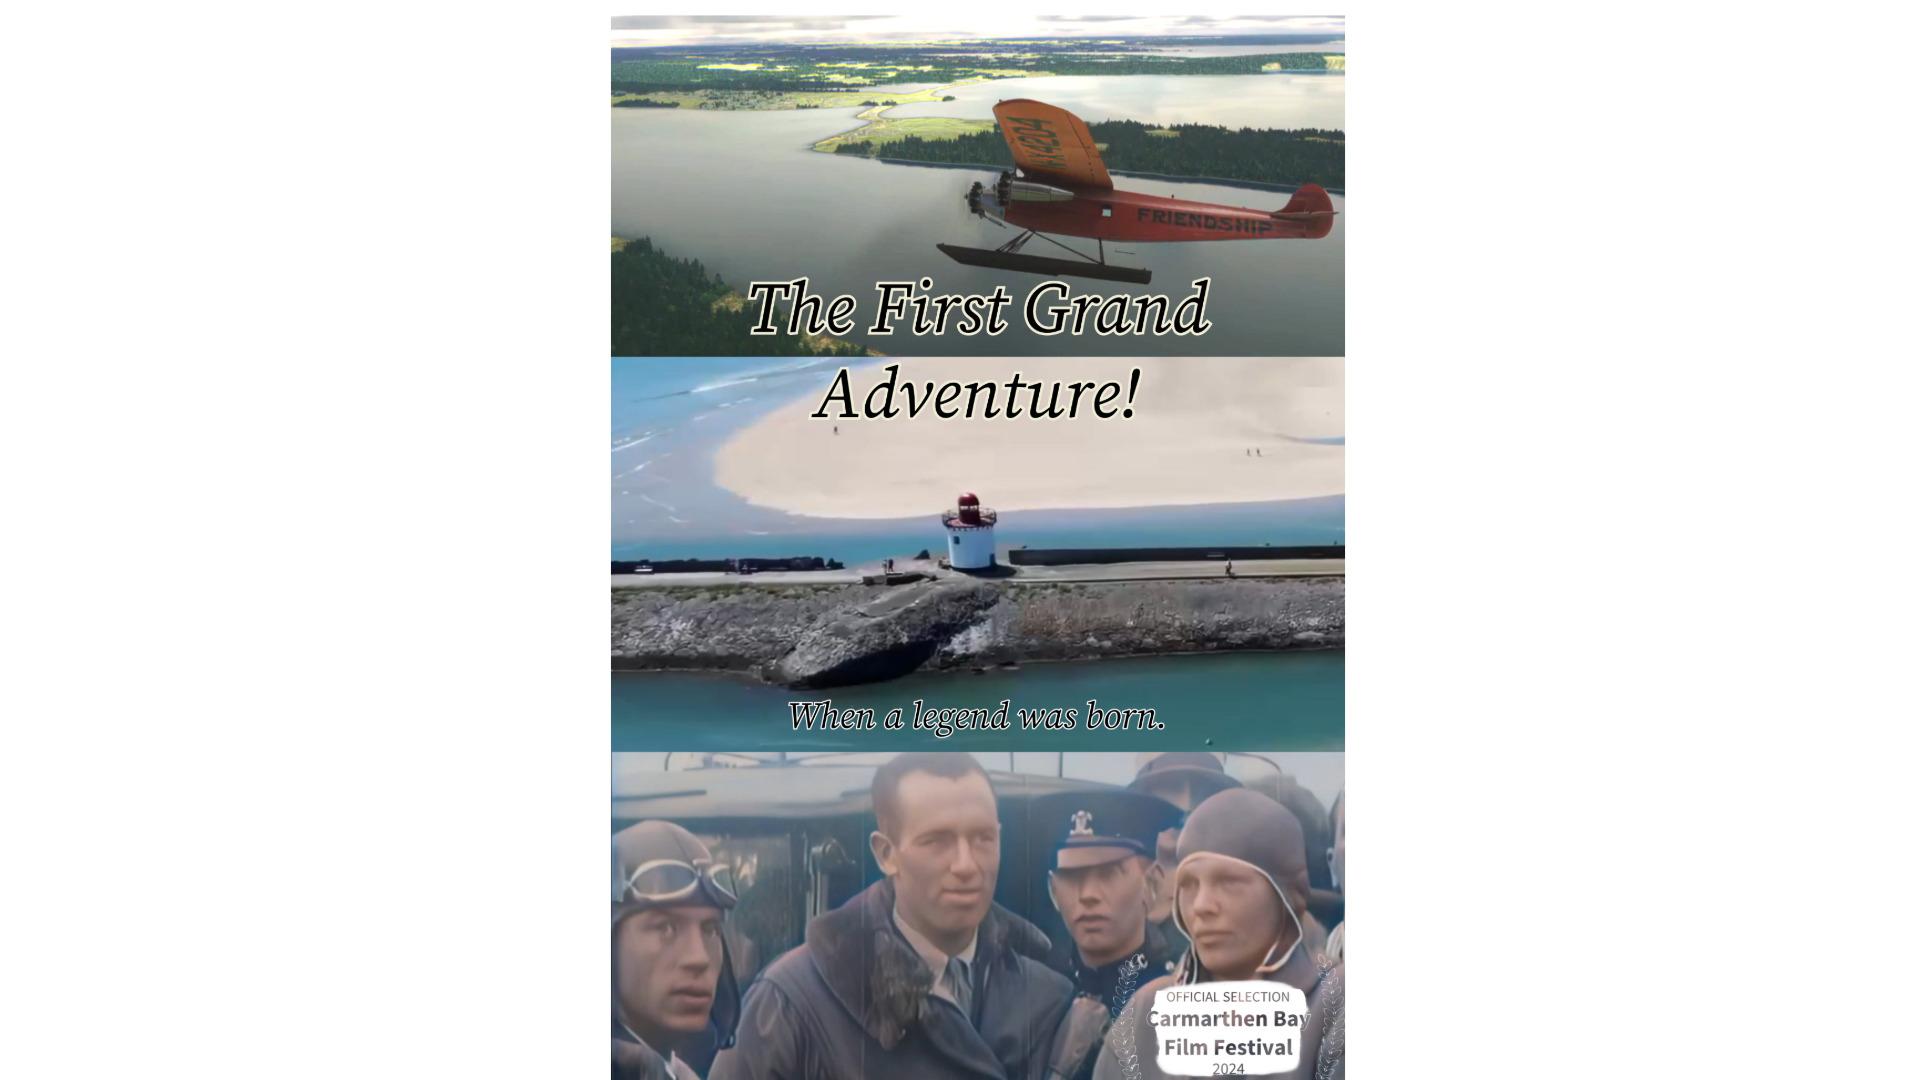 "The First Grand Adventure!"